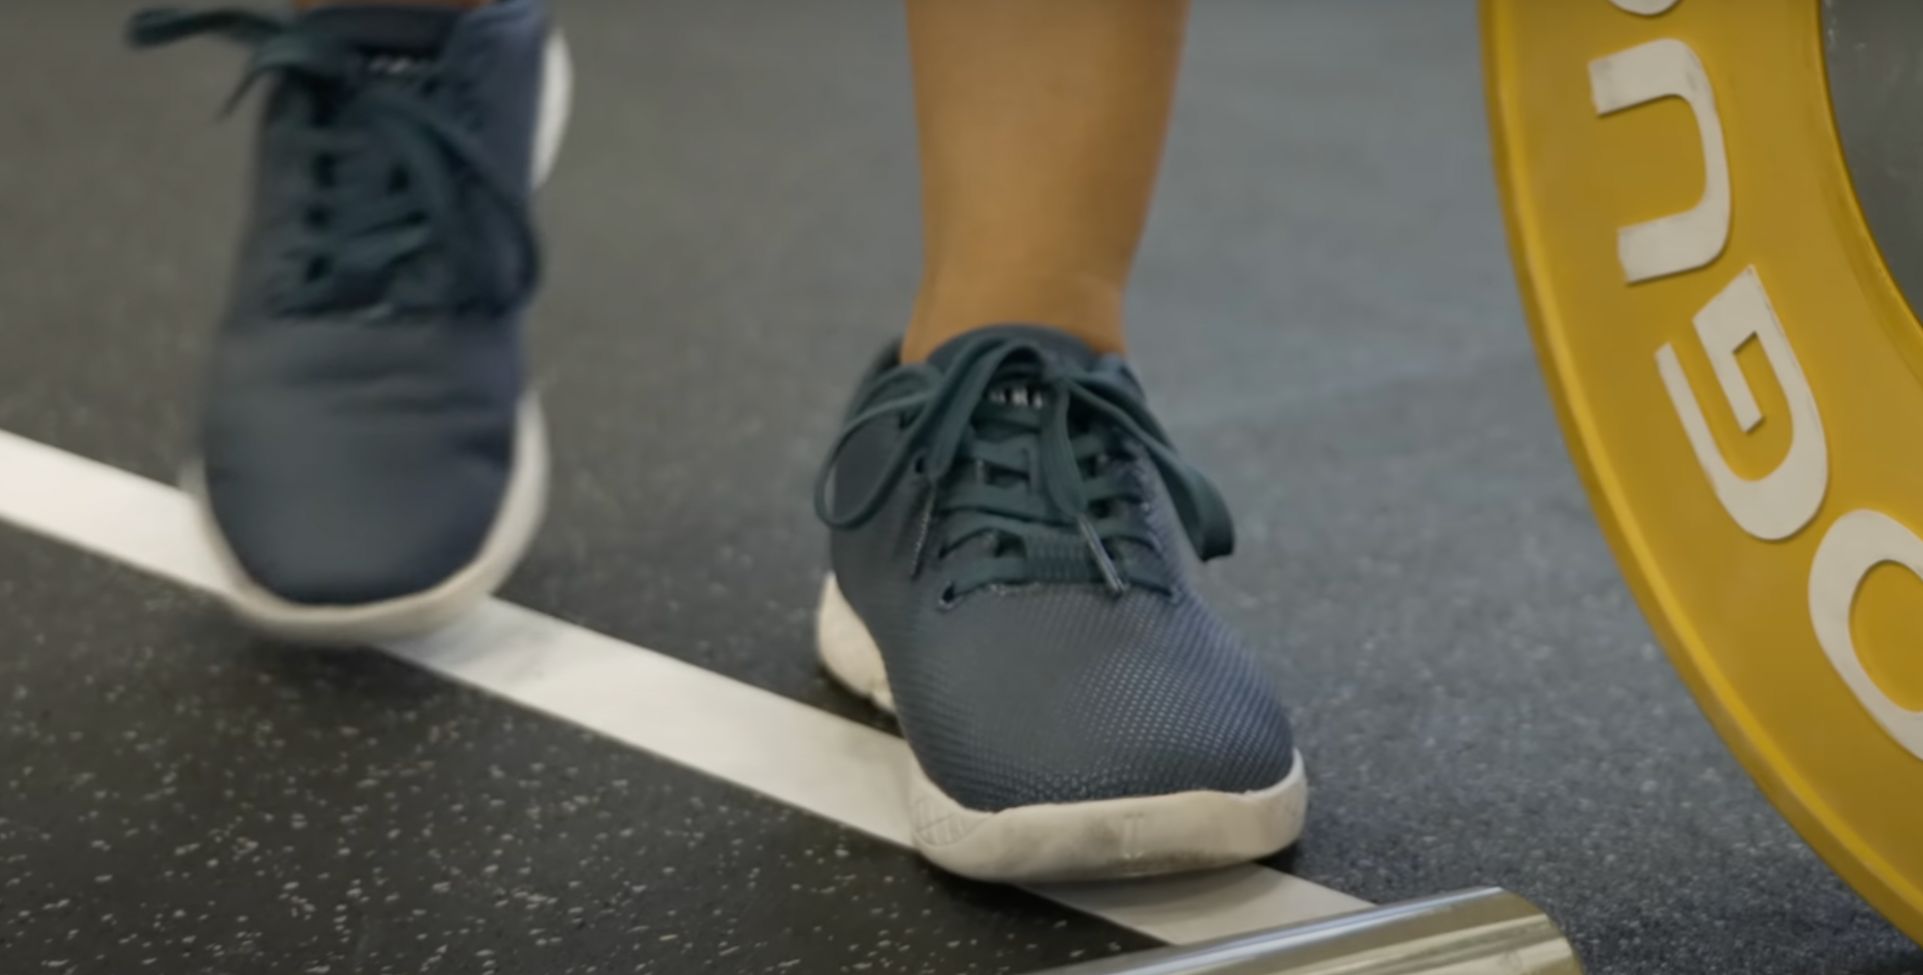 NOBULL Training Shoes for Lifting Weights